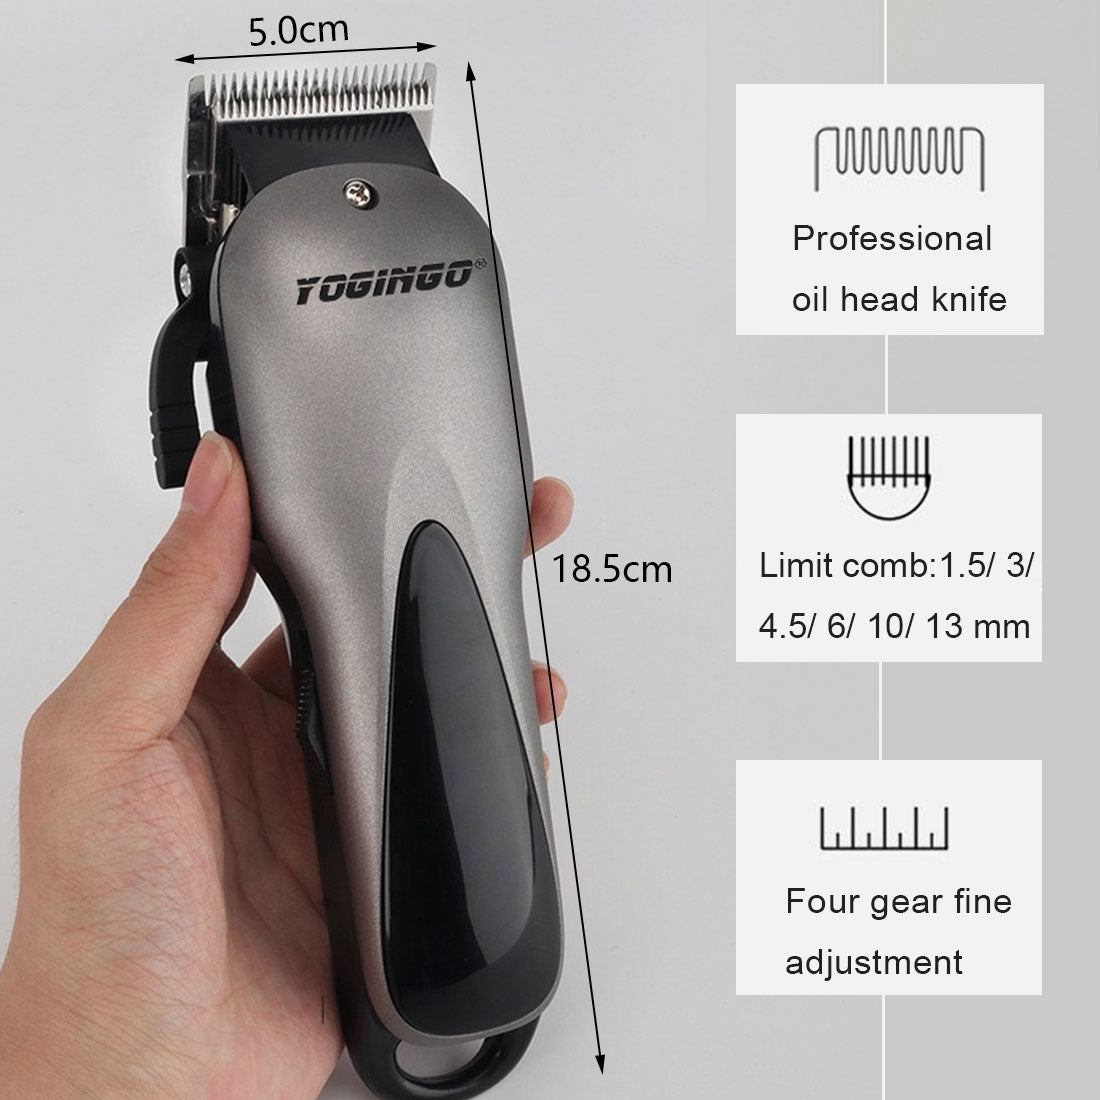 best professional hair clippers for home